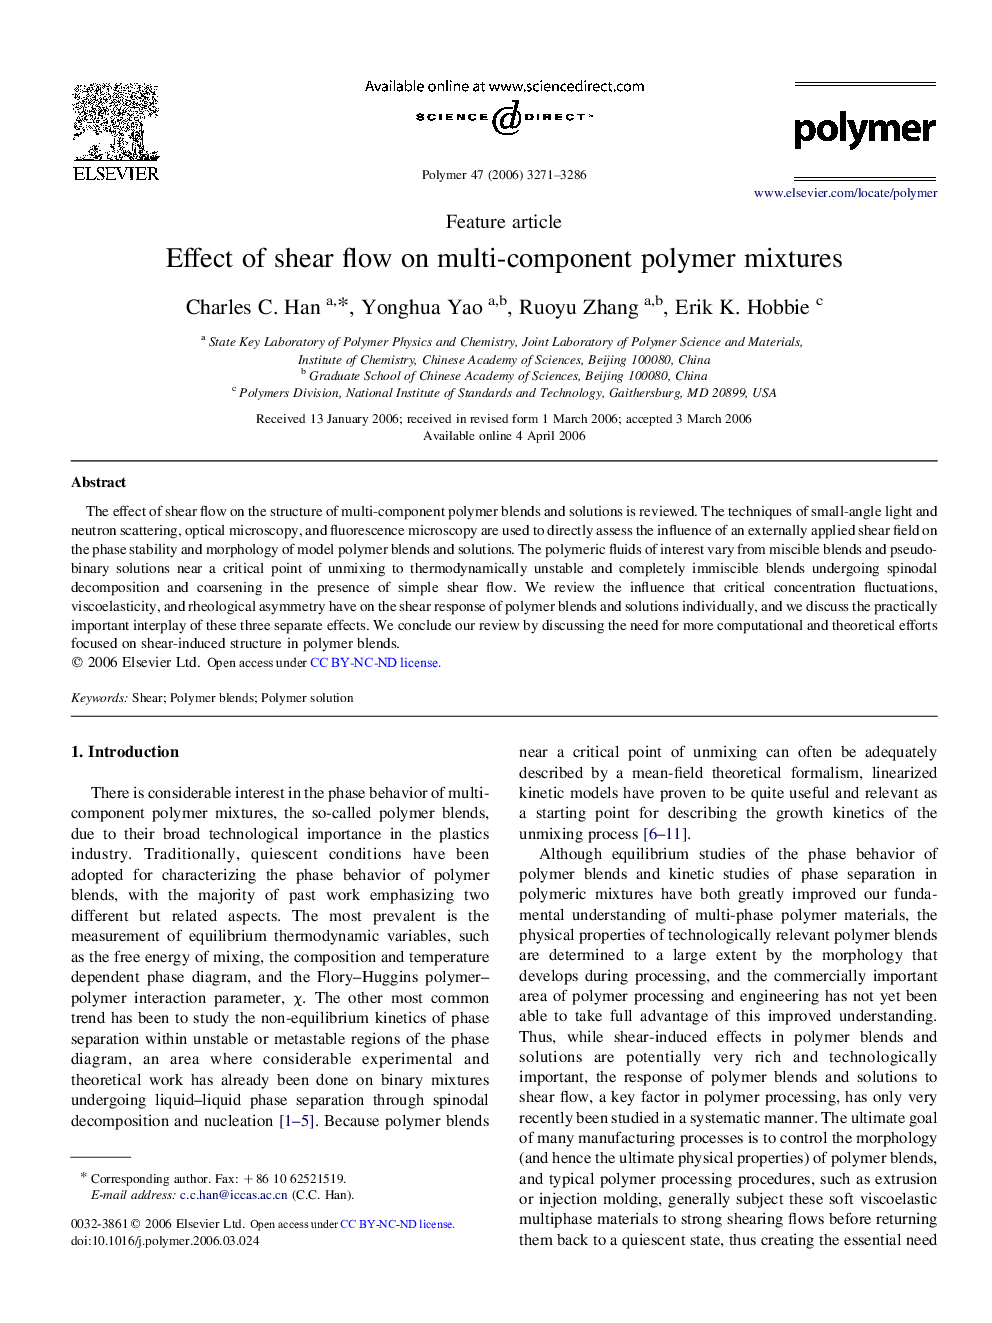 Effect of shear flow on multi-component polymer mixtures